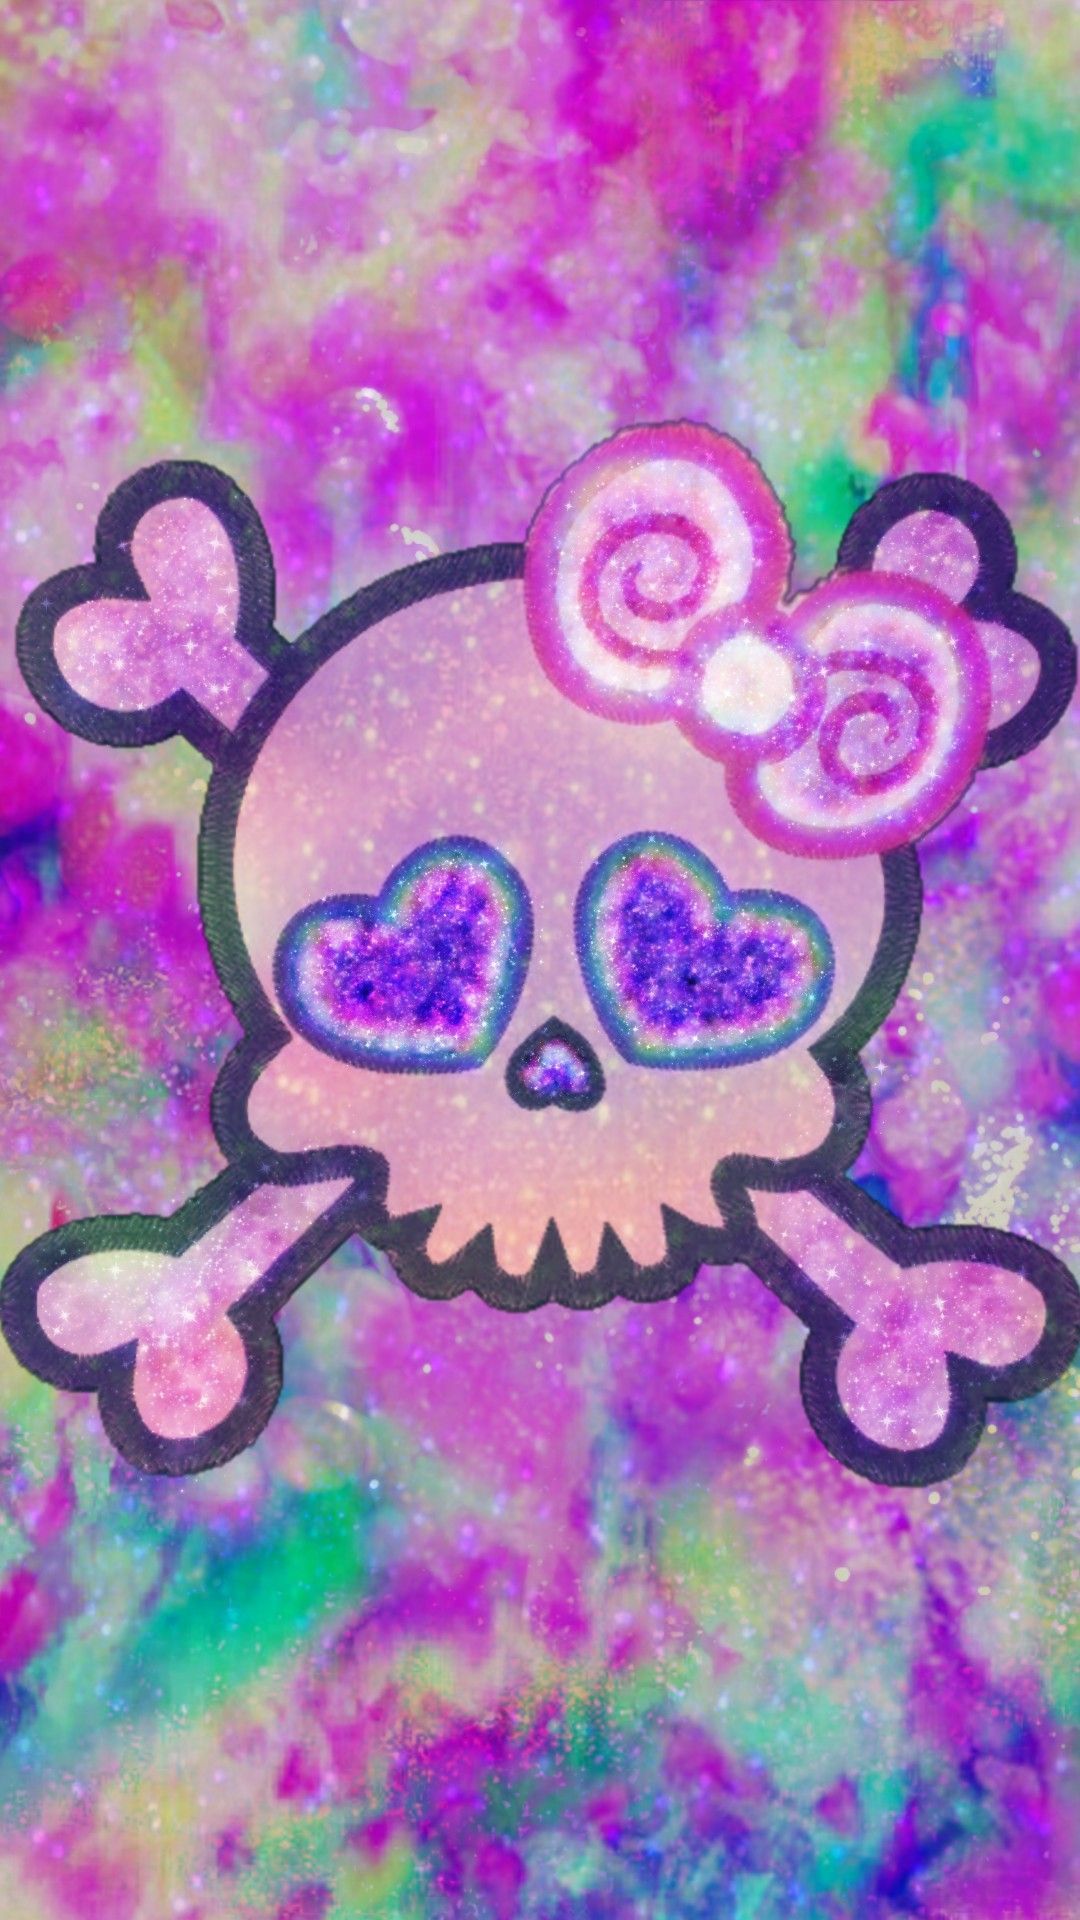 Retro Skull Galaxy, made by me #purple #sparkly #wallpaper #background #sparkles #glittery #galaxy #rain. Skull wallpaper, Neon wallpaper, Pink wallpaper iphone